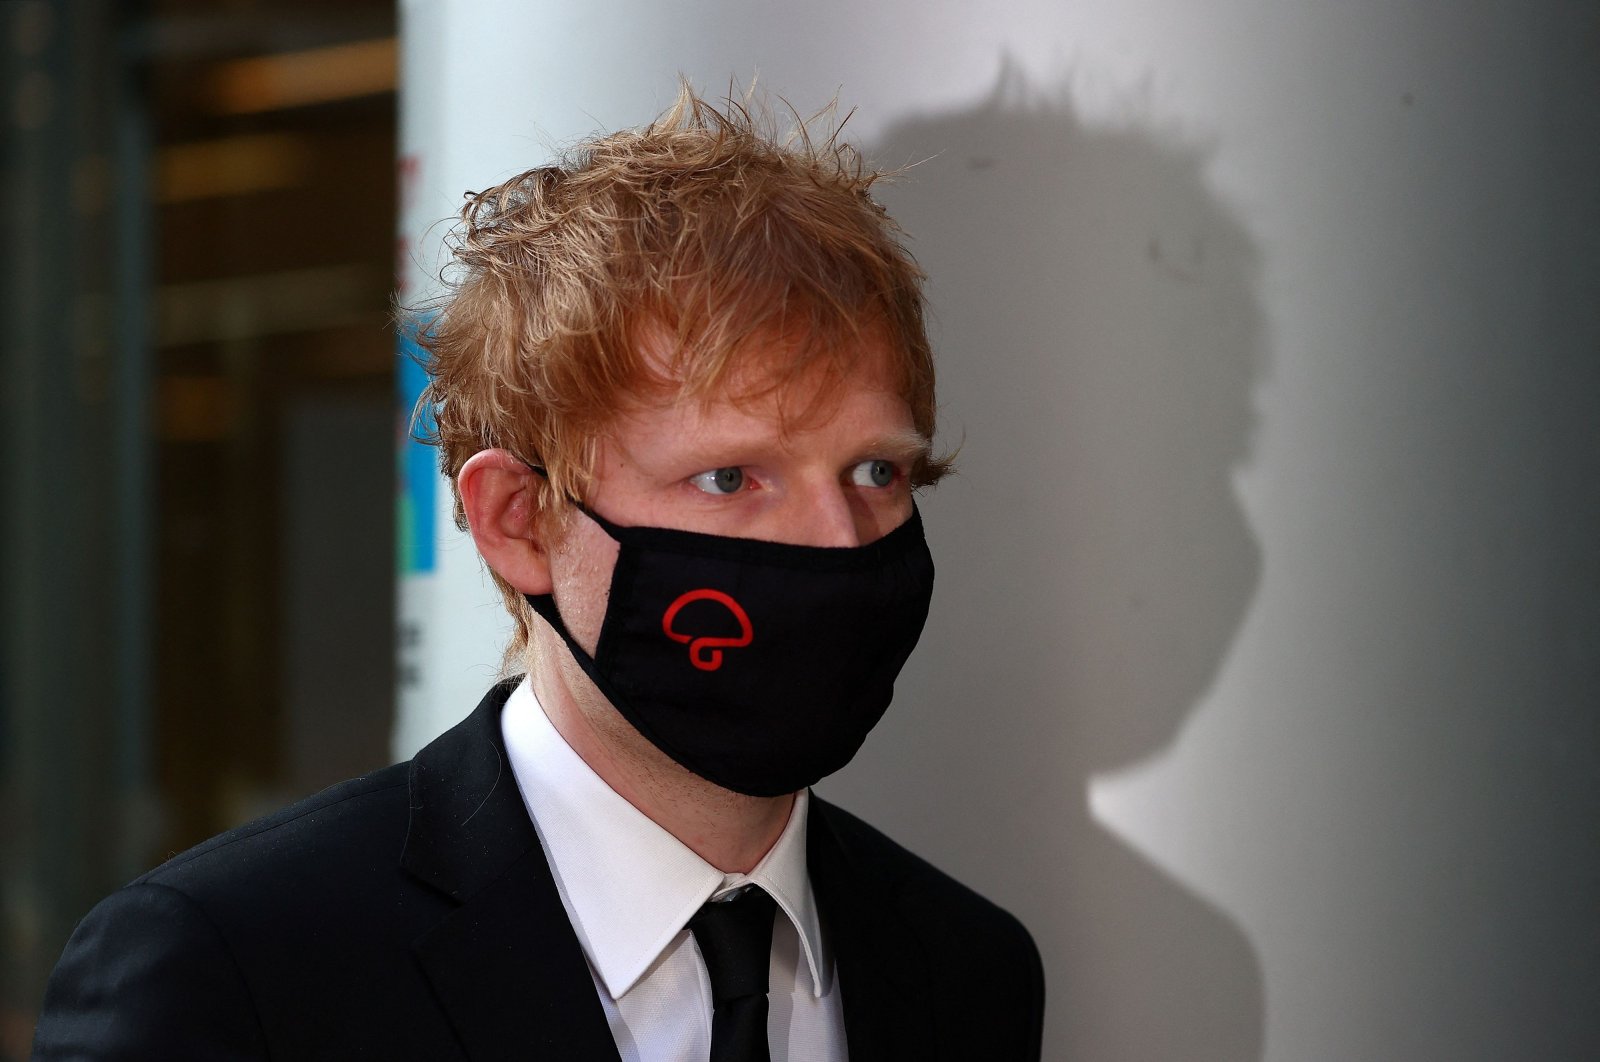 British singer-songwriter Ed Sheeran leaves from the Rolls Building of the High Court in London, on March 7, 2022 after attending the second day of a copyright trial over allegations that his hit song &quot;Shape of You&quot; has similarities to a song written by Sami Chokri and Ross O&#039;Donoghue. (AFP)